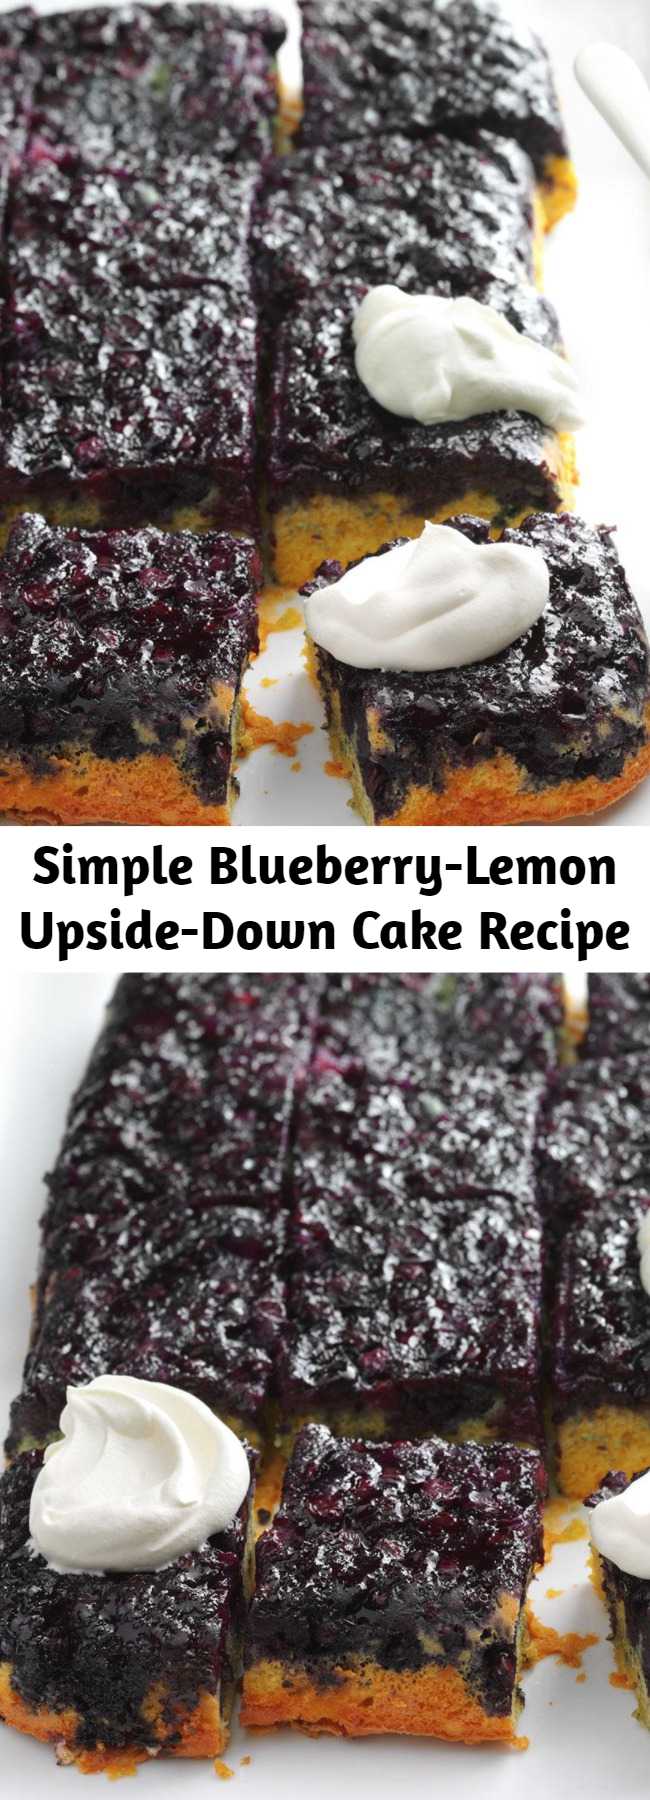 Simple Blueberry-Lemon Upside-Down Cake Recipe - We love a good upside-down cake, and this our favorite one yet. The blueberries get super-juicy as they bake—it's the perfect representation of spring!